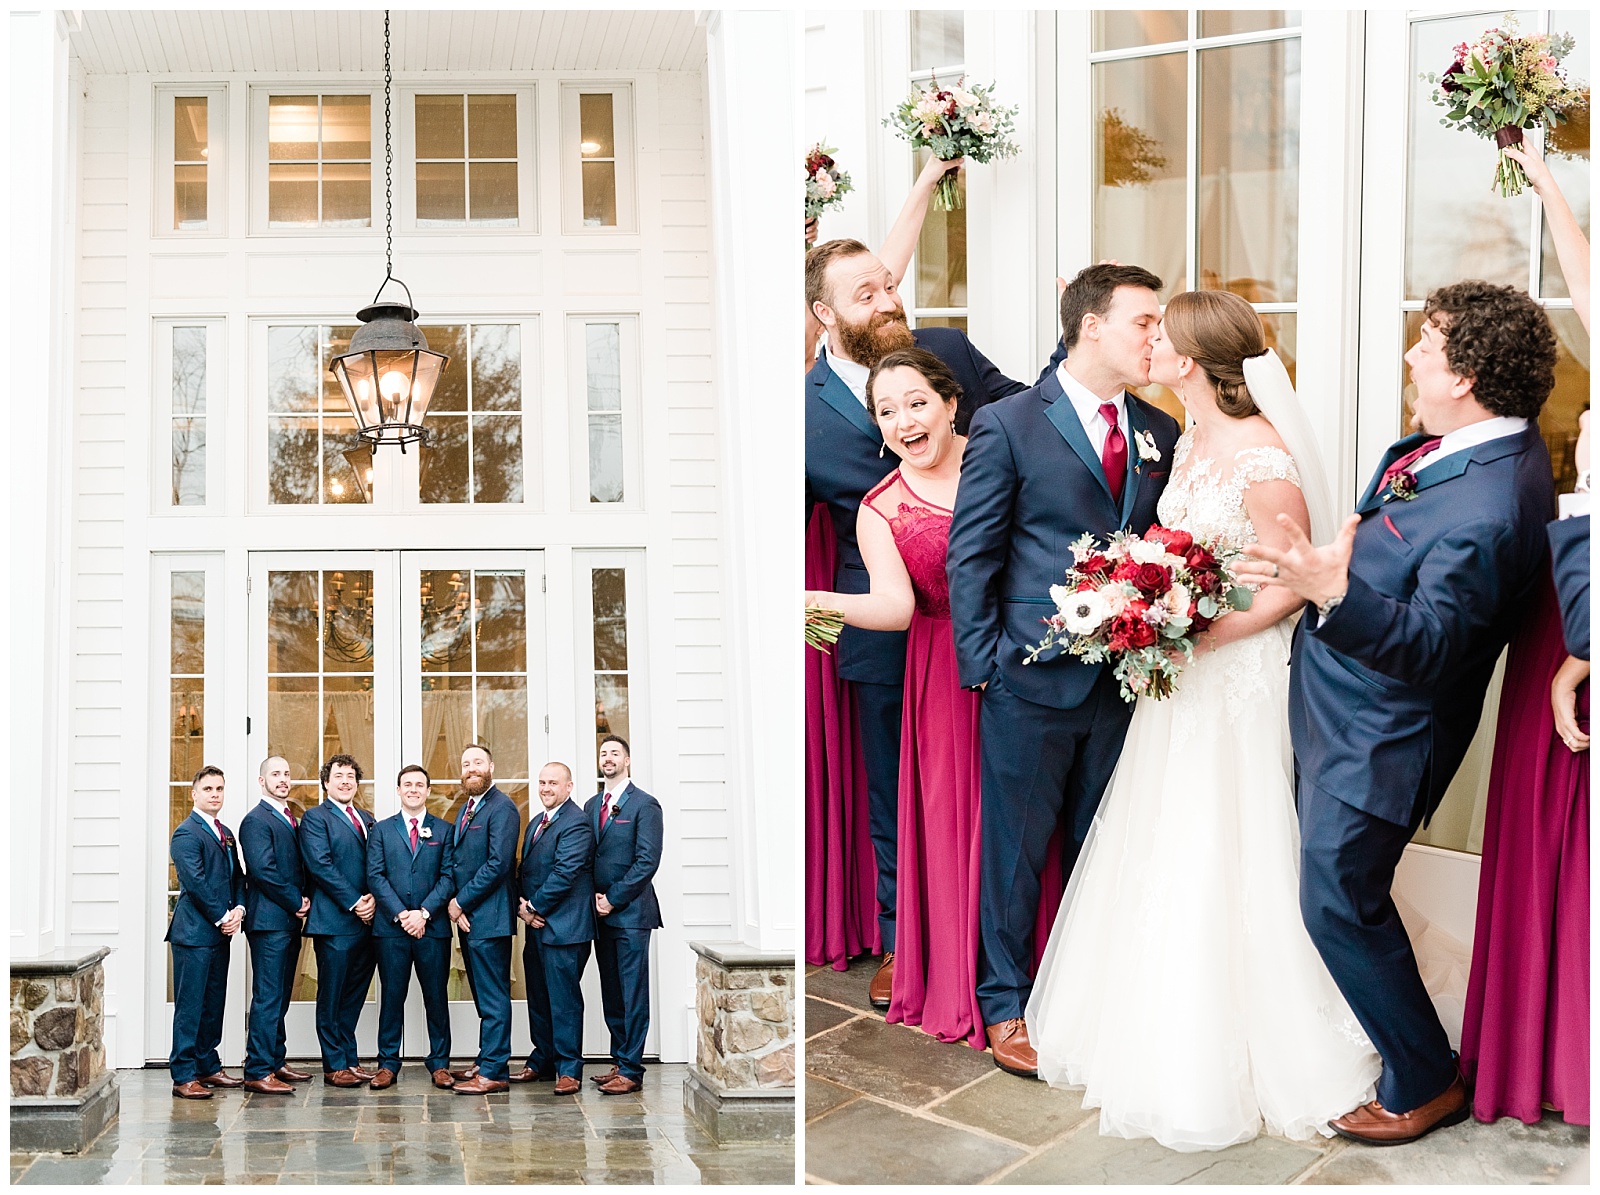 Bridal Party,Bridesmaids,Groomsmen,NJ,New Jersey,The Ryland Inn,Twisted Willow,Wedding,Wedding Party,Wedding Photographer,Winter,